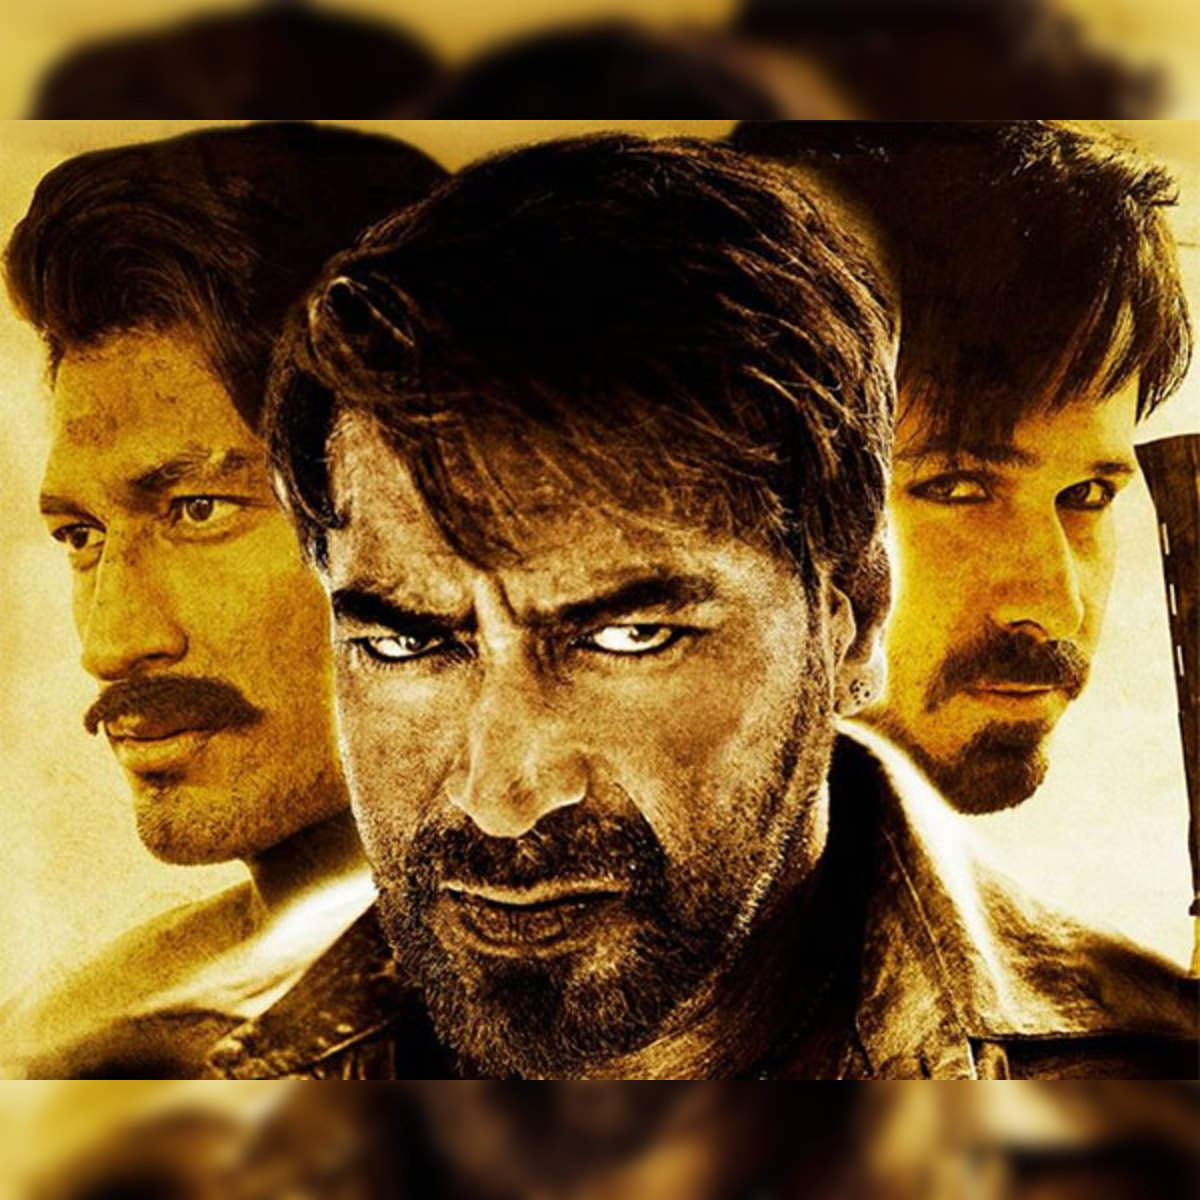 WATCH: 'Baadshaho'- Dialogue Promos released! - The Indian Wire